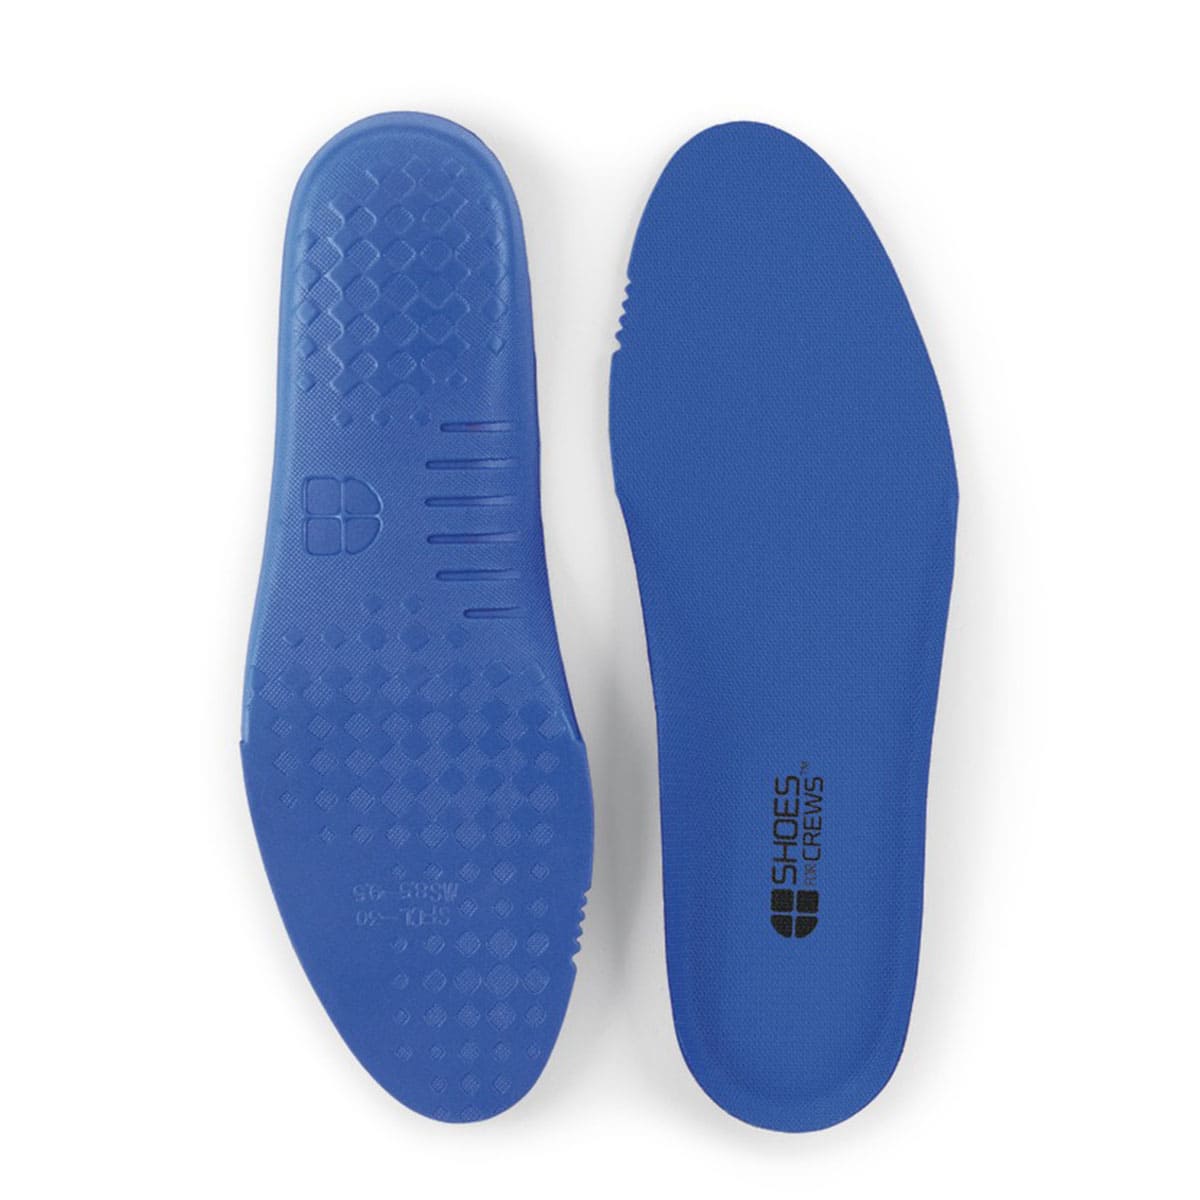 The Shoes For Crews comfort insole is made from durable EVA material and incorporates a cushioned layer and an adaptable arch, seen from above and below.